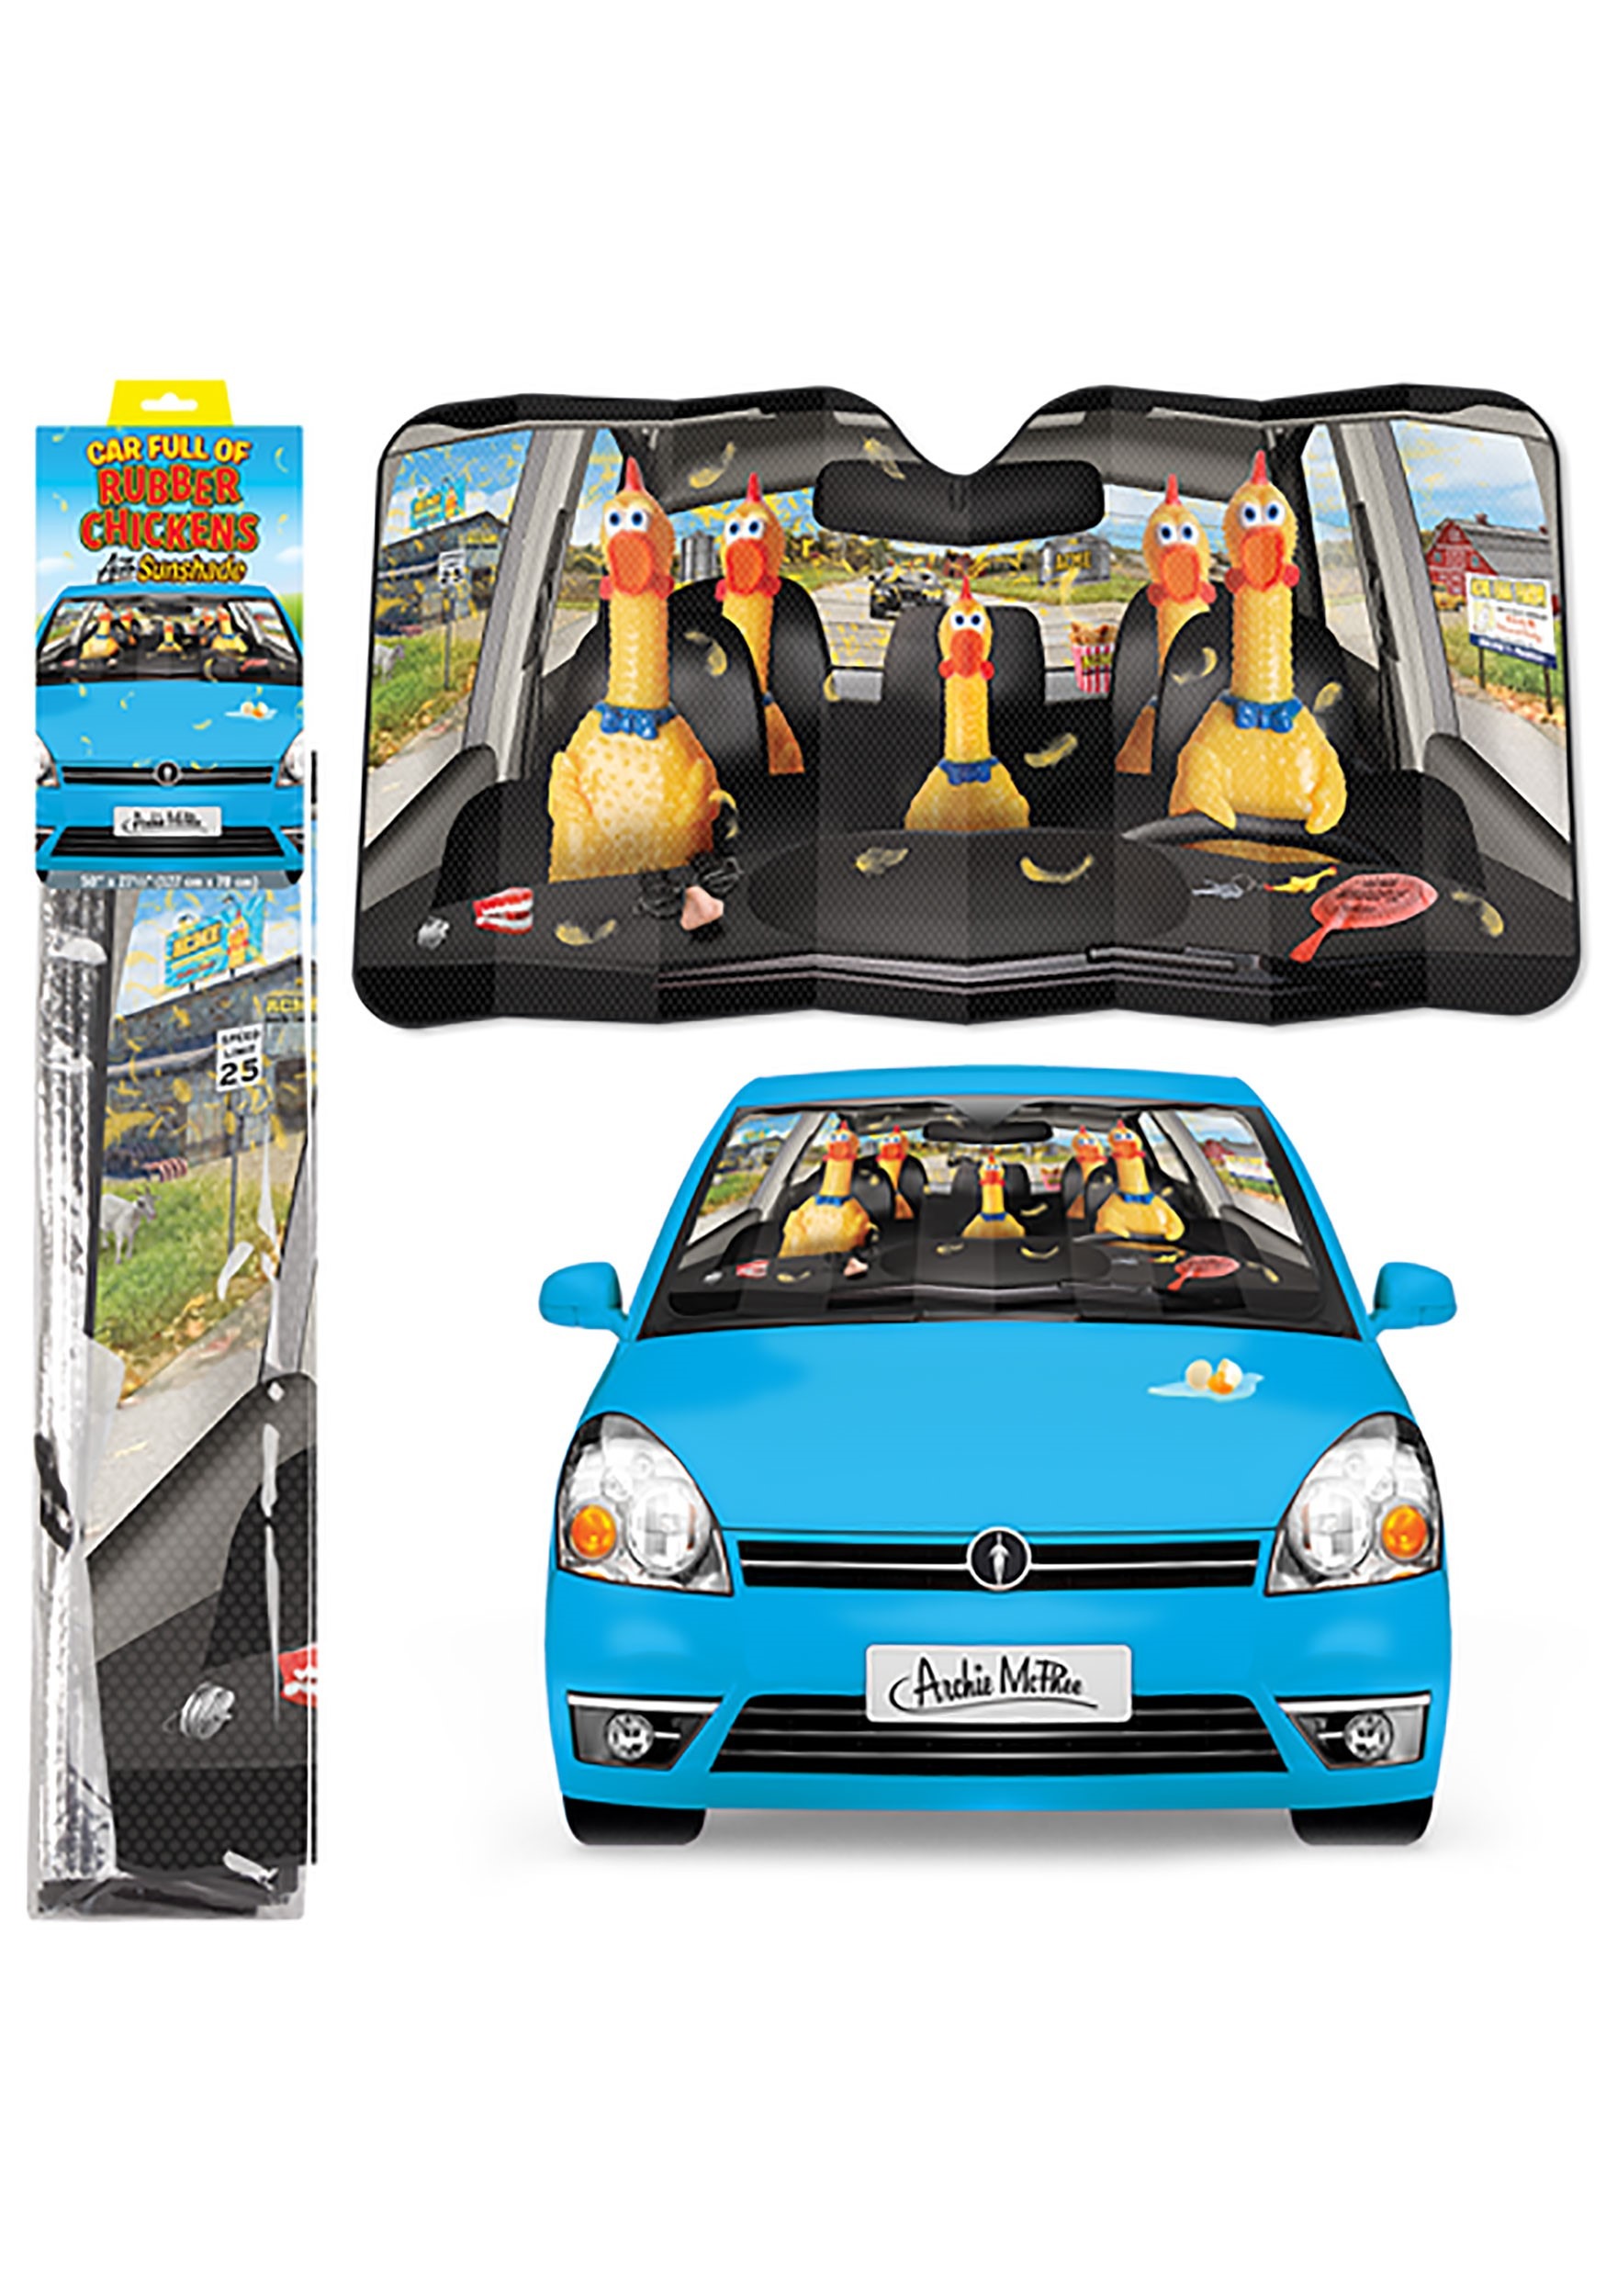 Car Full of Rubber Chickens Auto Windshield Sunshade